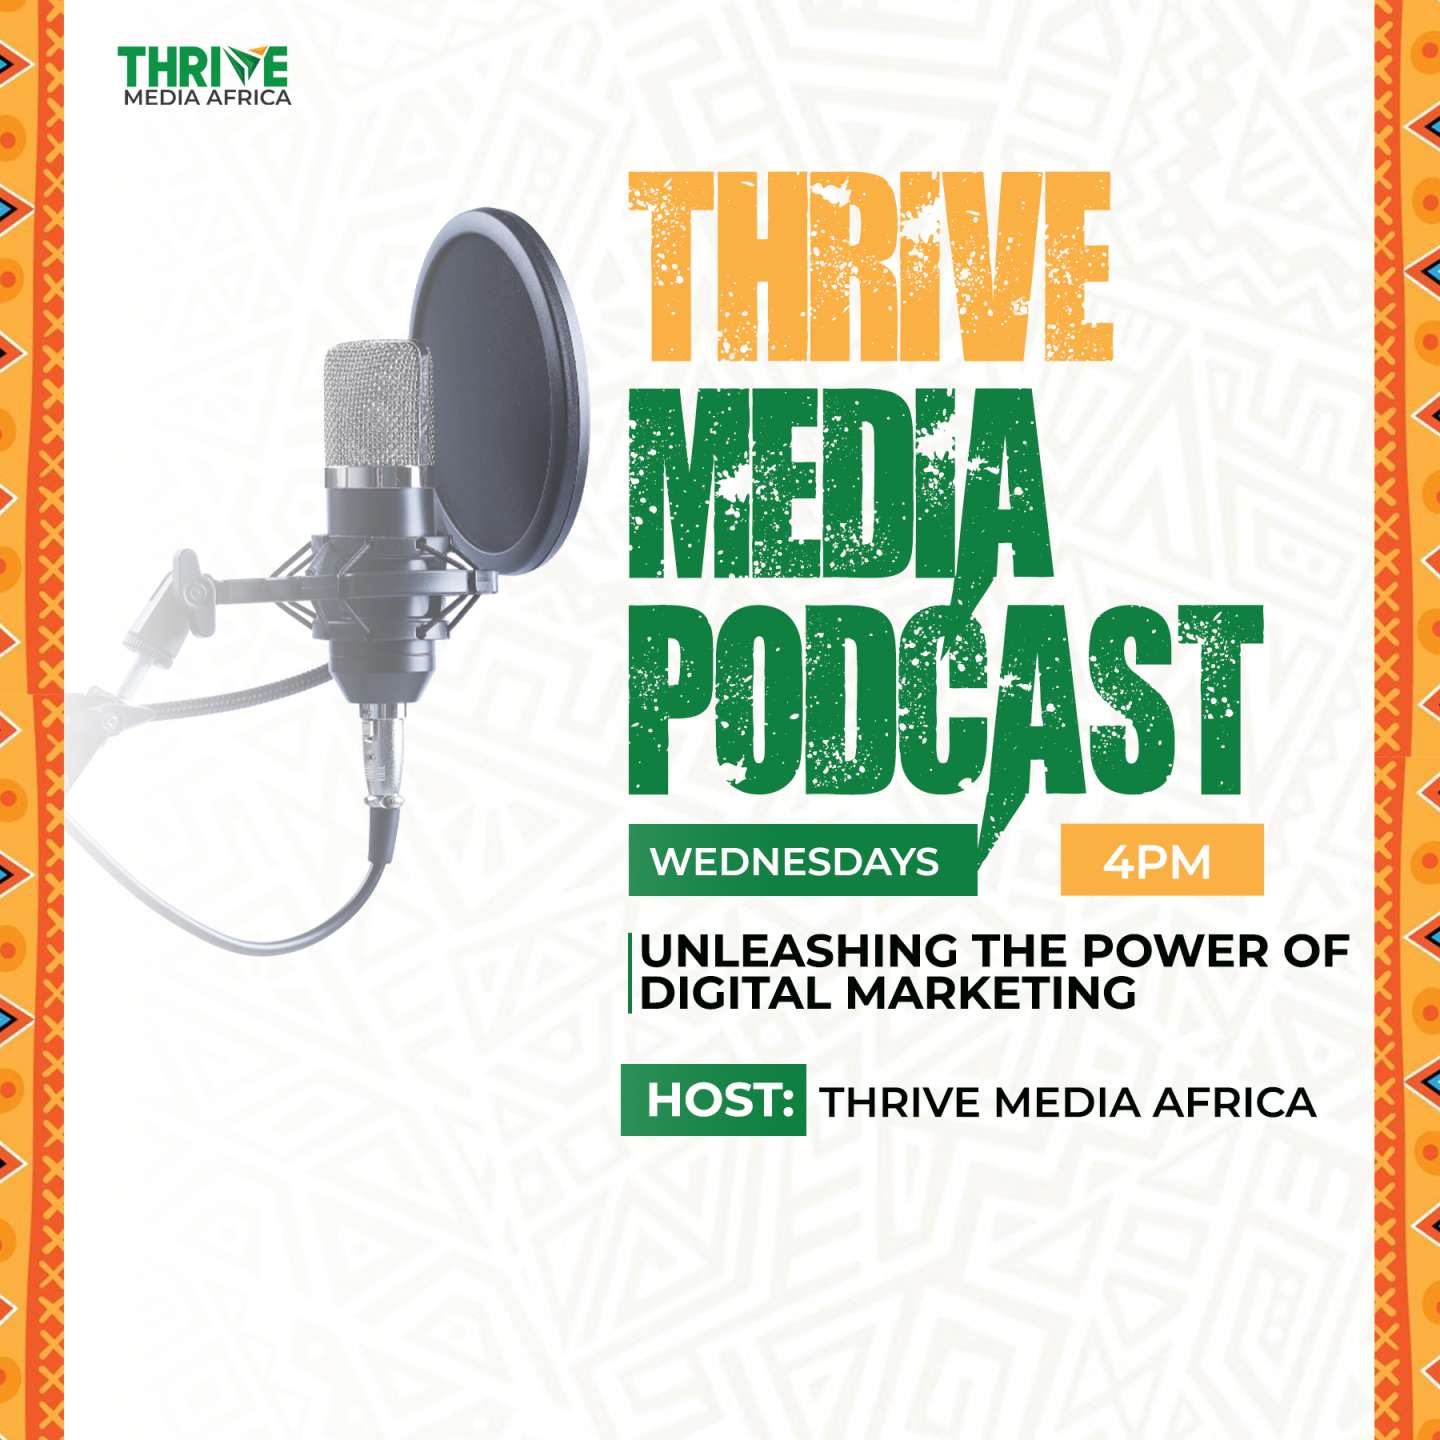 THRIVE PODCAST UPDATE